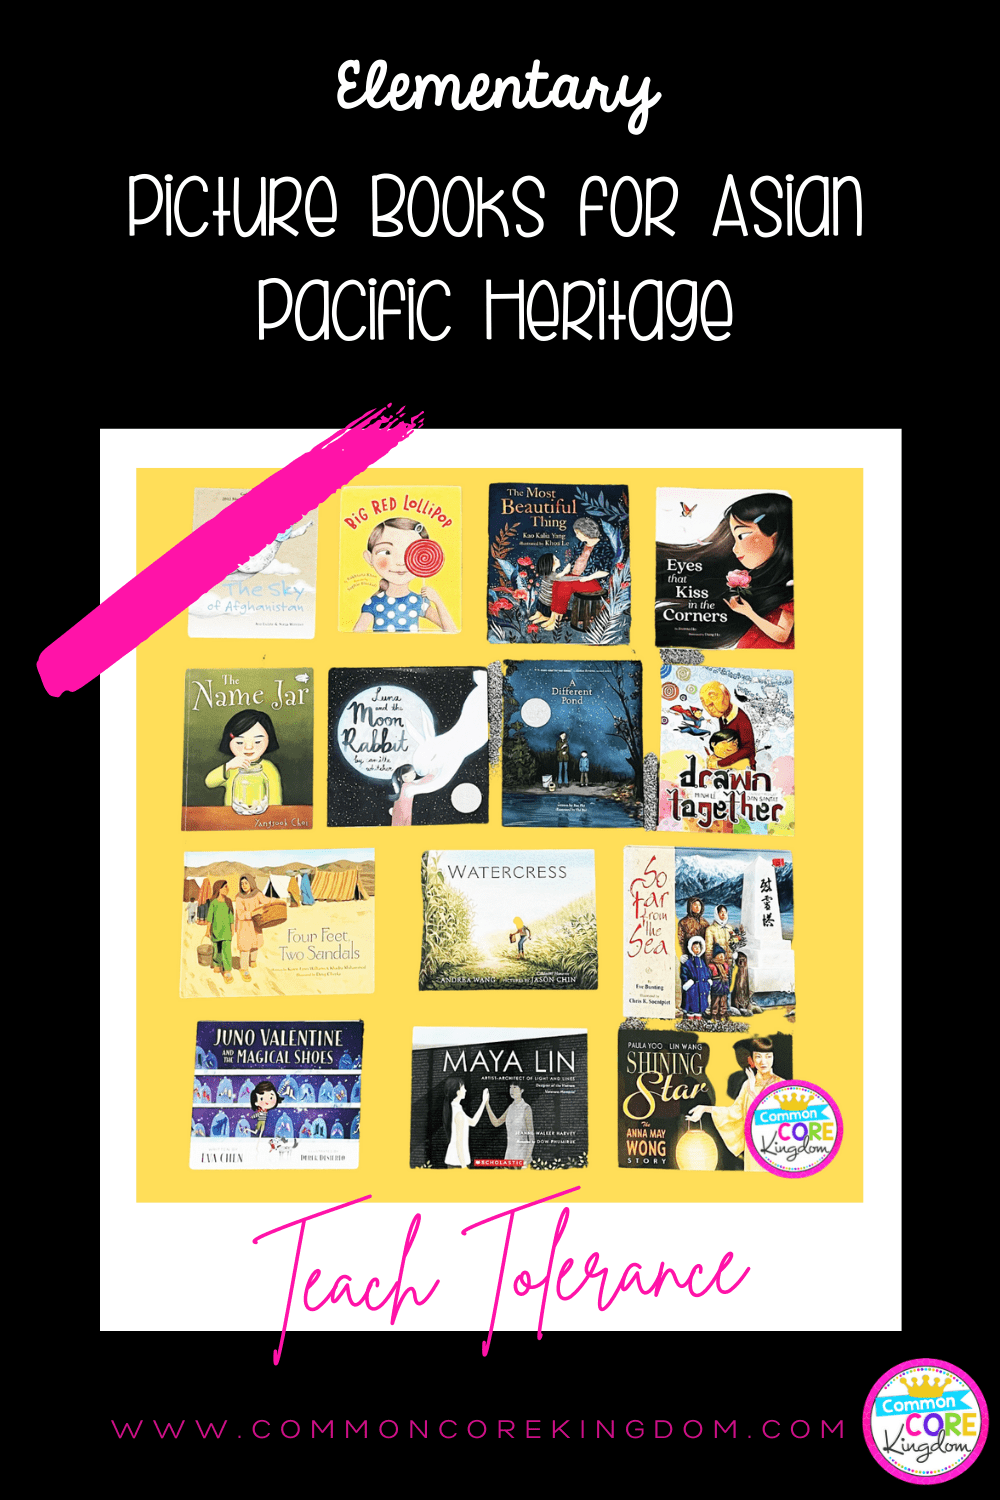 Elementary Picture Books for Asian Pacific Heritage Blog